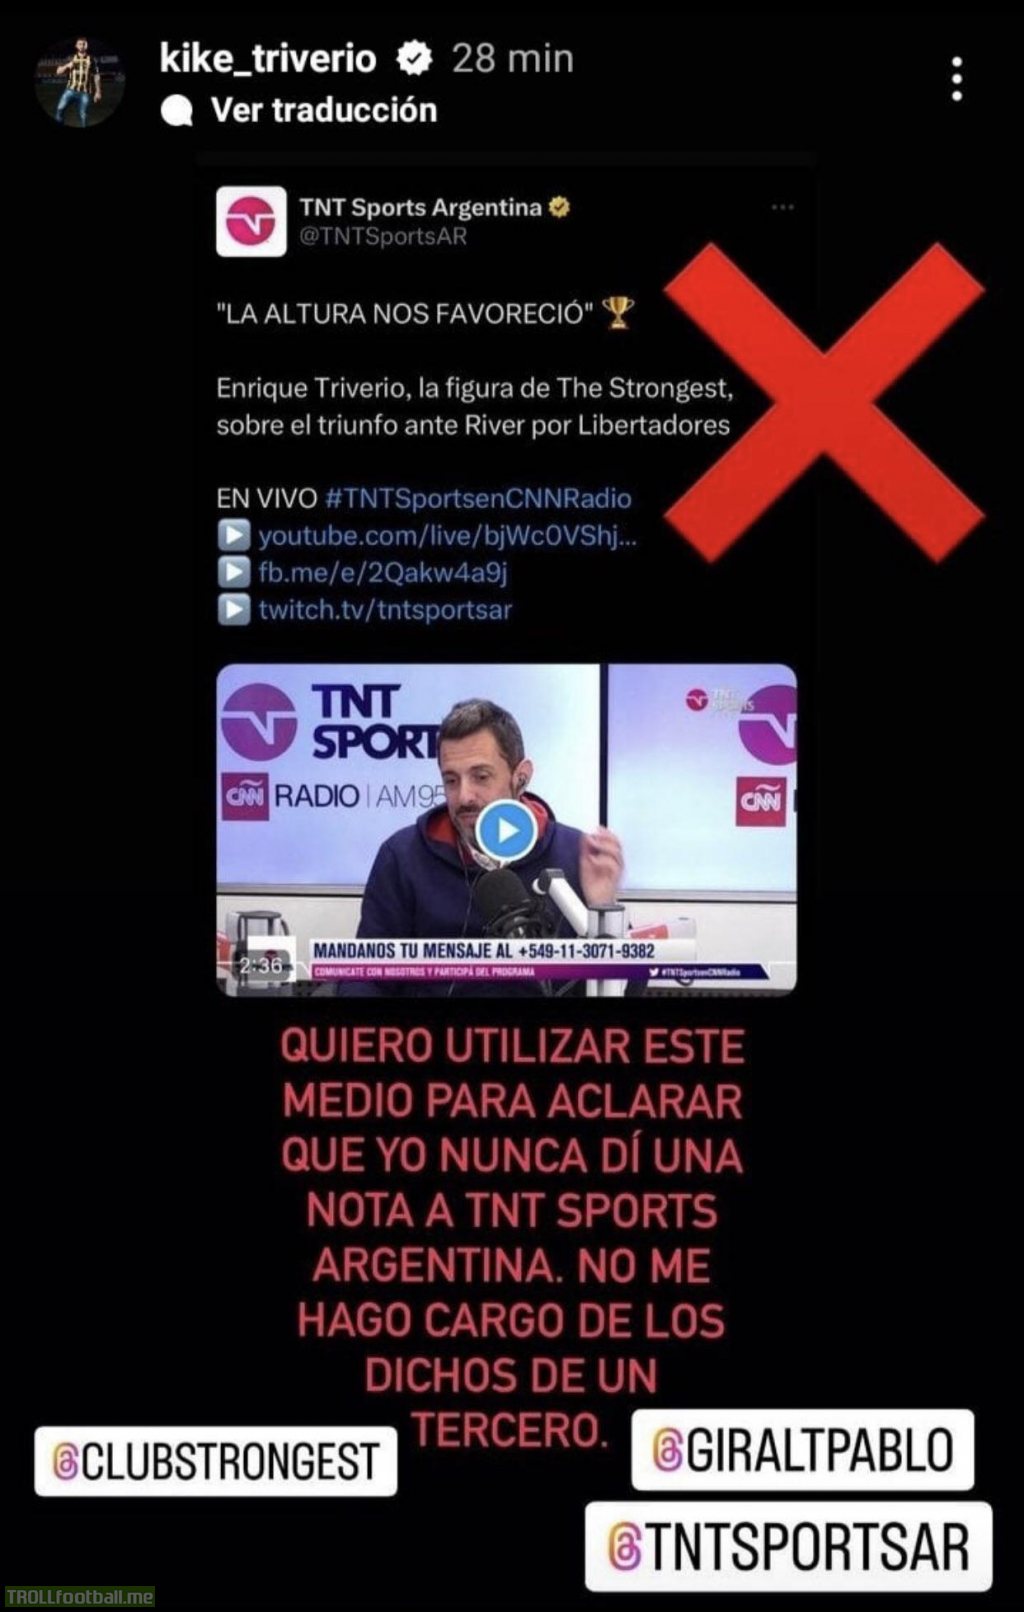 TNT Sports Argentina published an interview with Enrique Triverio, MOTM in last night’s The Strongest’s victory against River Plate. The player however has denied ever giving them an interview; TNT used and imposter to film the interview.